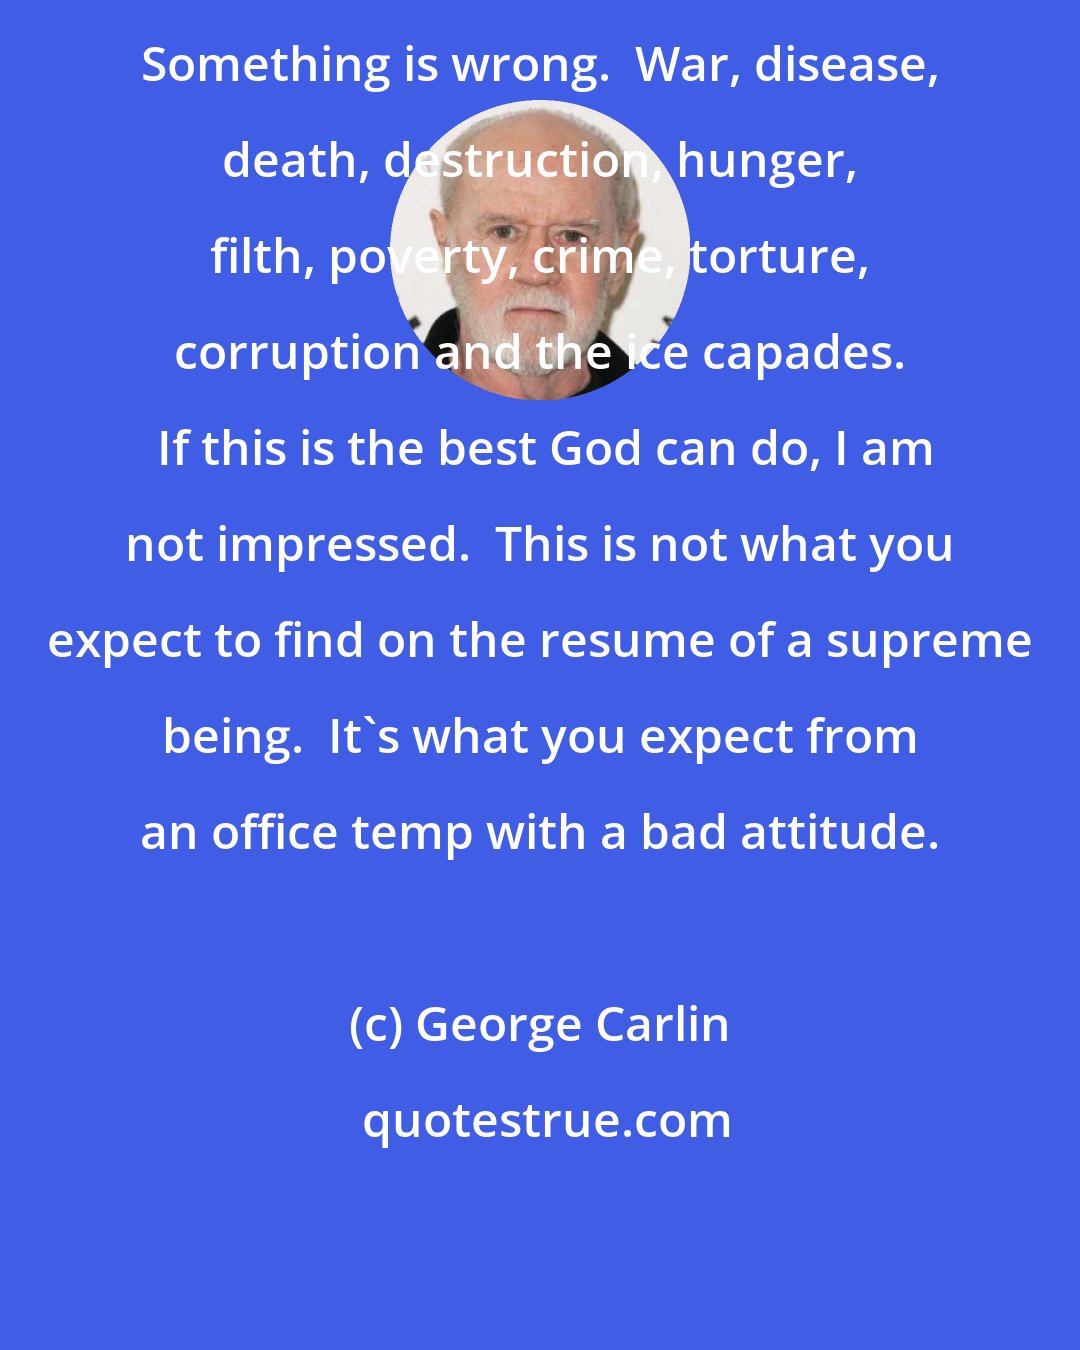 George Carlin: Something is wrong.  War, disease, death, destruction, hunger, filth, poverty, crime, torture, corruption and the ice capades.  If this is the best God can do, I am not impressed.  This is not what you expect to find on the resume of a supreme being.  It's what you expect from an office temp with a bad attitude.